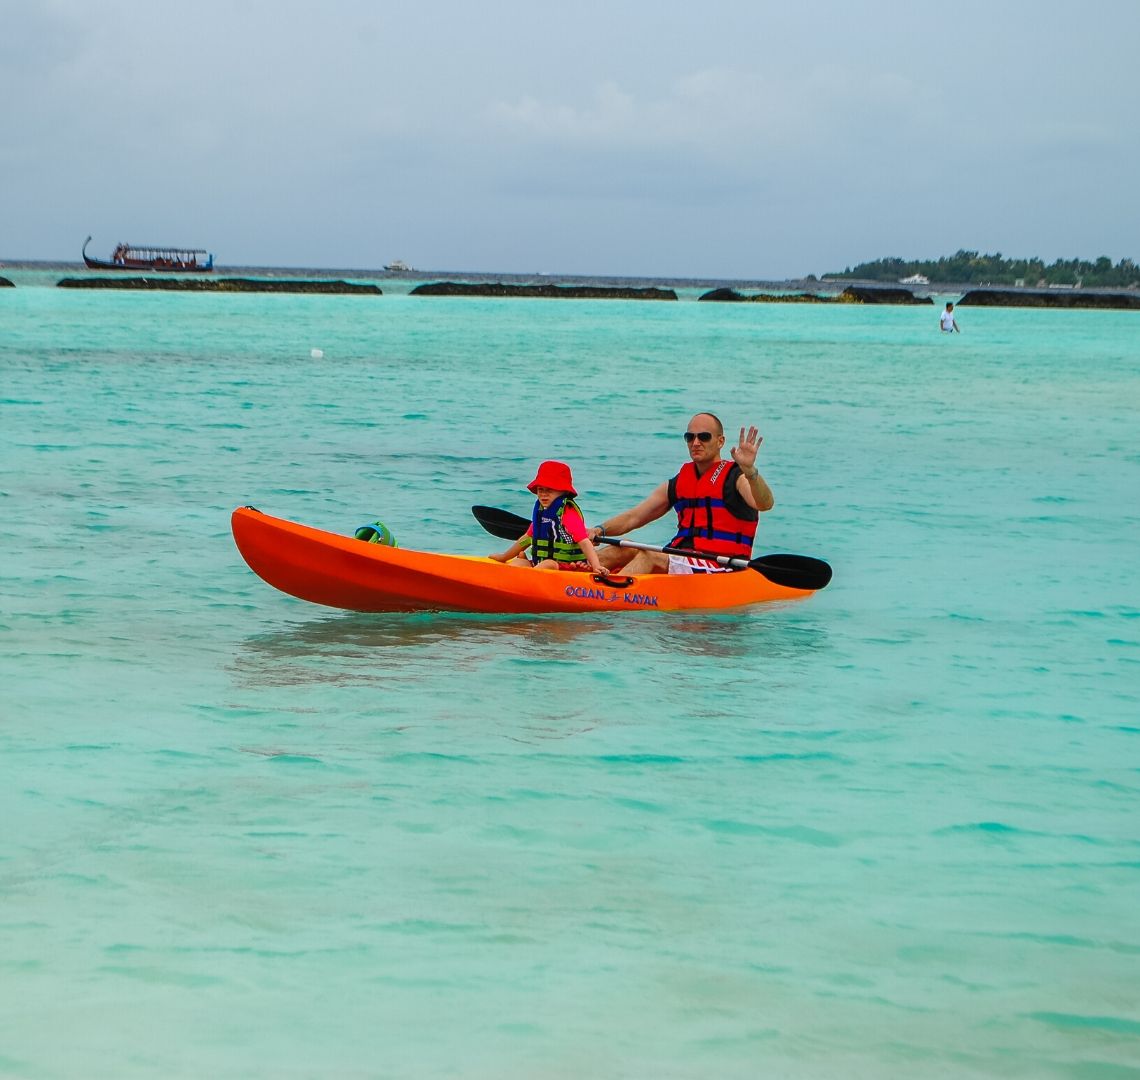 Maldives Activities / Things to do in the Maldives - Thing 1 and Mr Wanderlust in bright orange canoe. Mr wanderlust is waving at me. The sea is bright blue and there is a traditional boat in the background behind the breakwater. The sky is cloudy and stormy. 